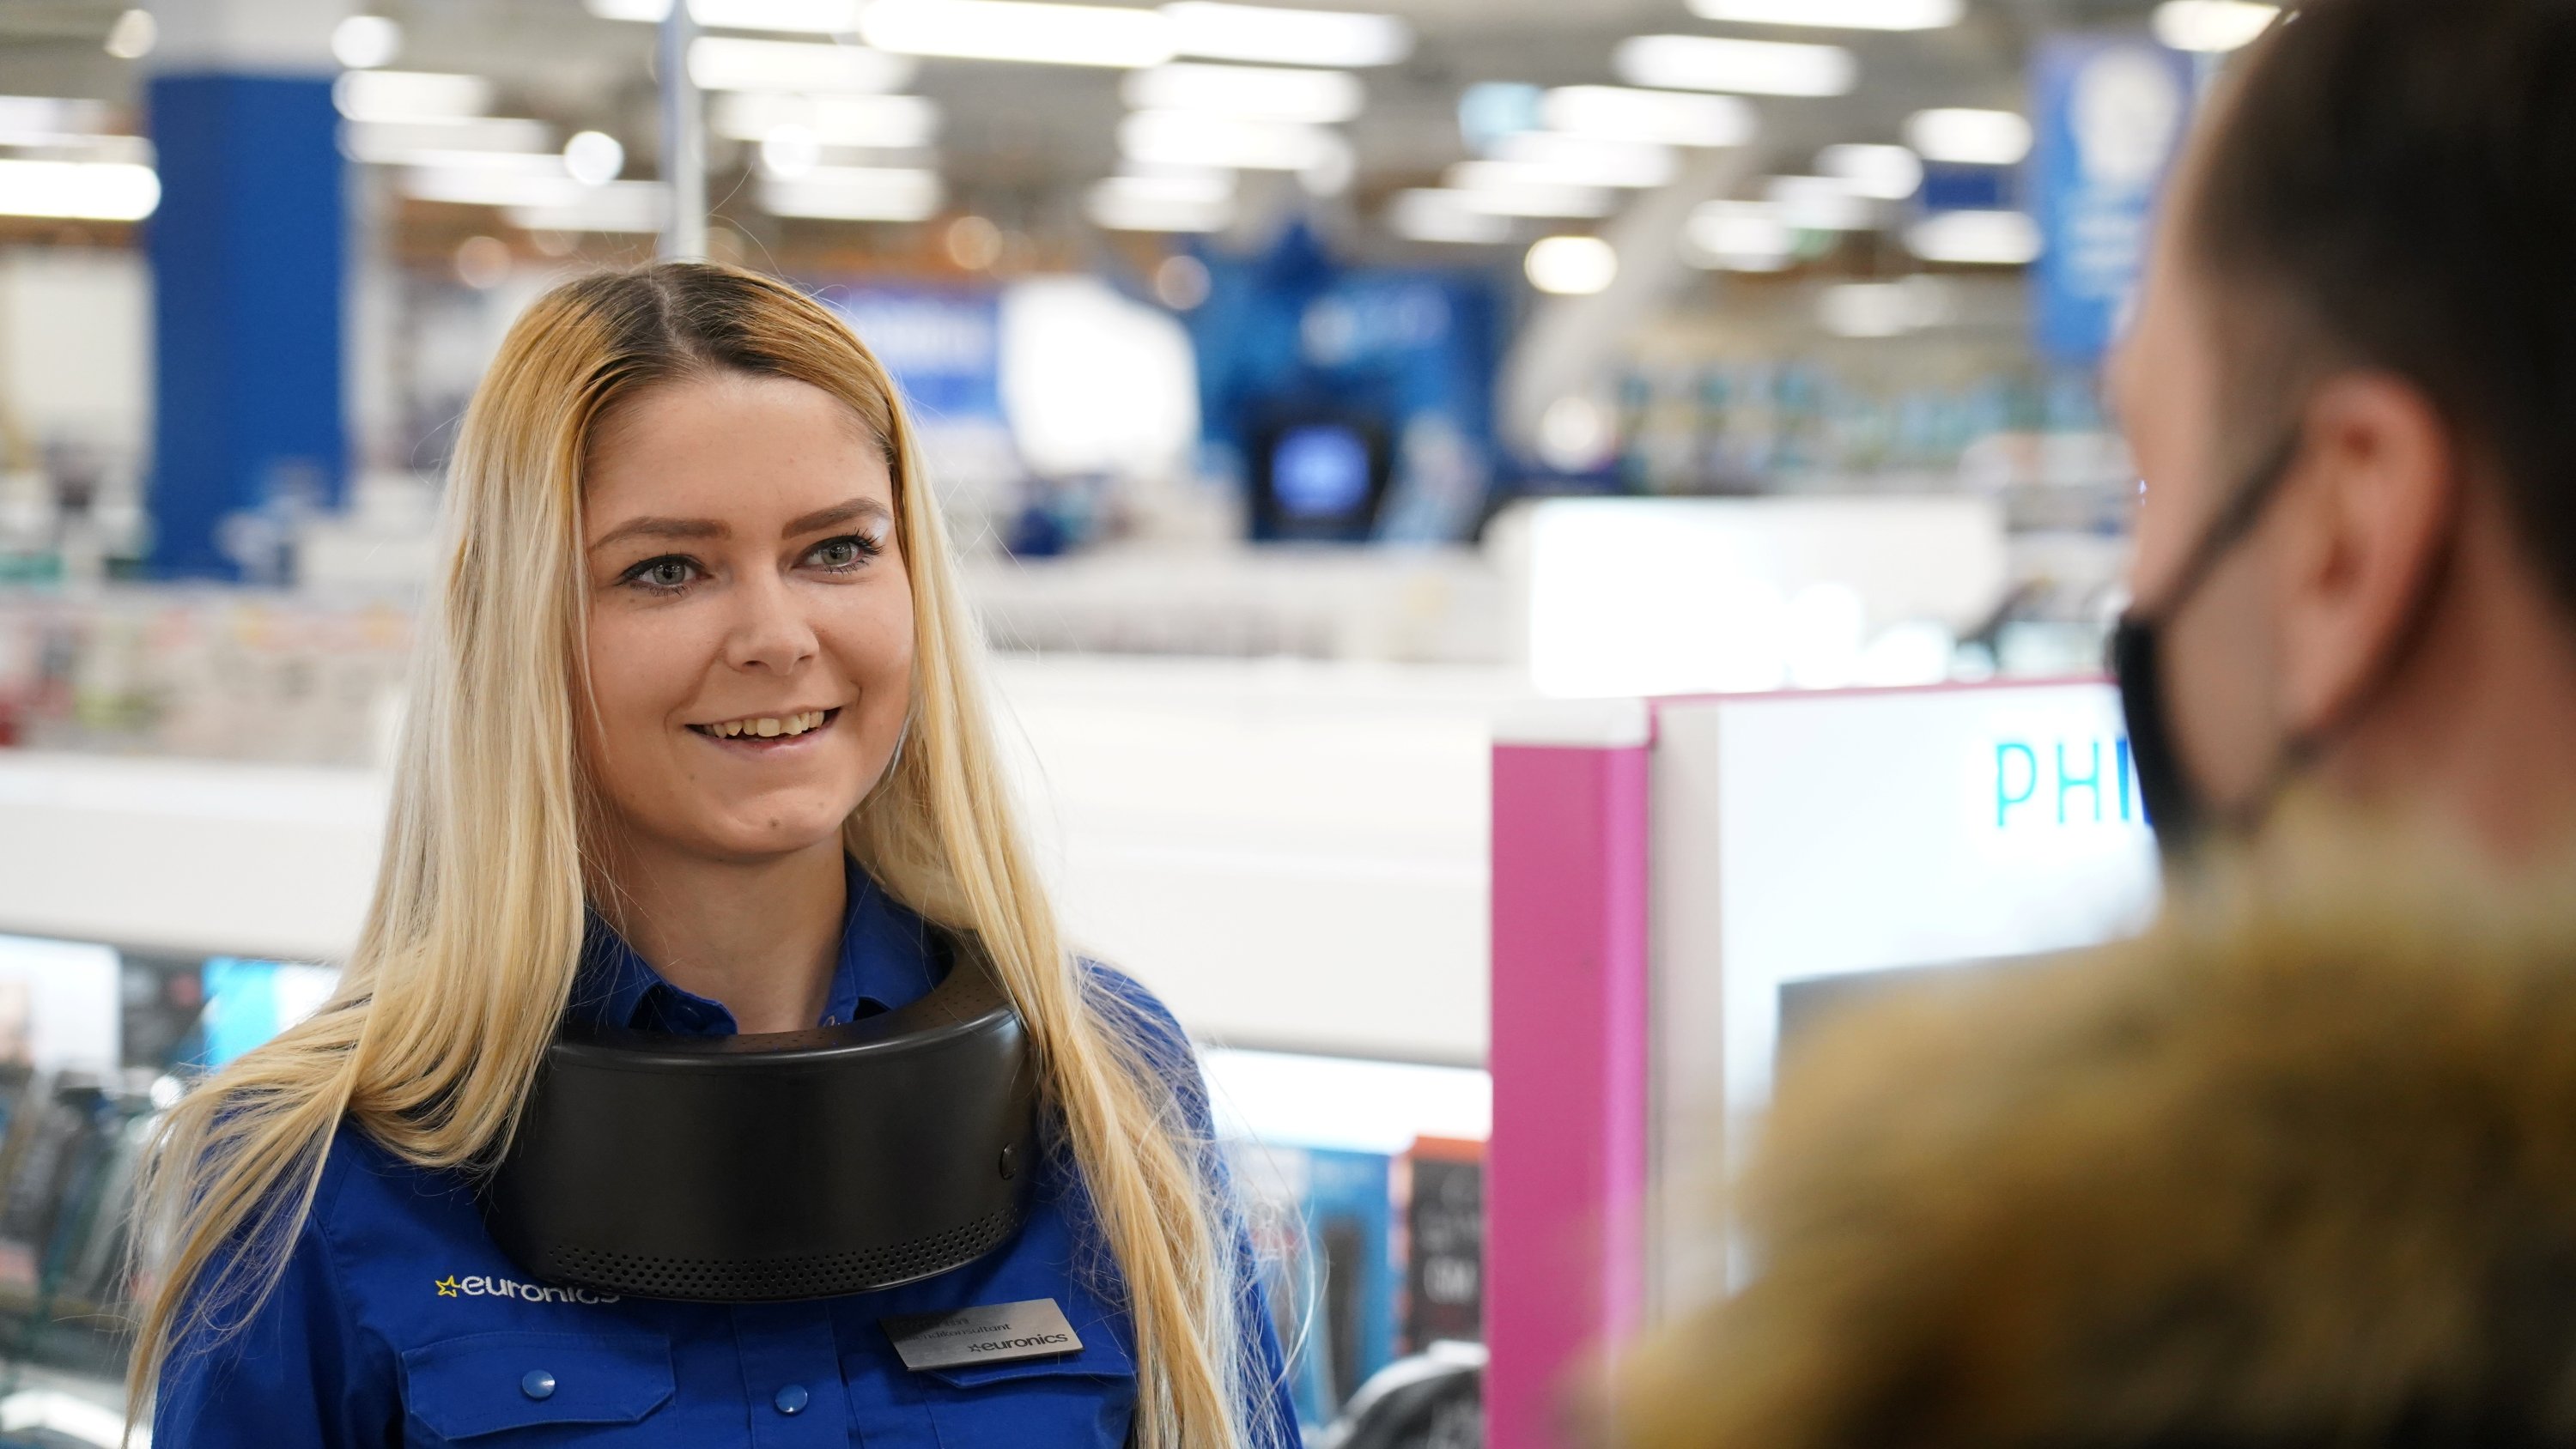 Euronics shop customer service employee Katrin Veltson greets customers while using a wearable UV air purifier to protect against viruses, including COVID-19, in Tallinn, Estonia, Feb. 22, 2021. (Reuters Photo)